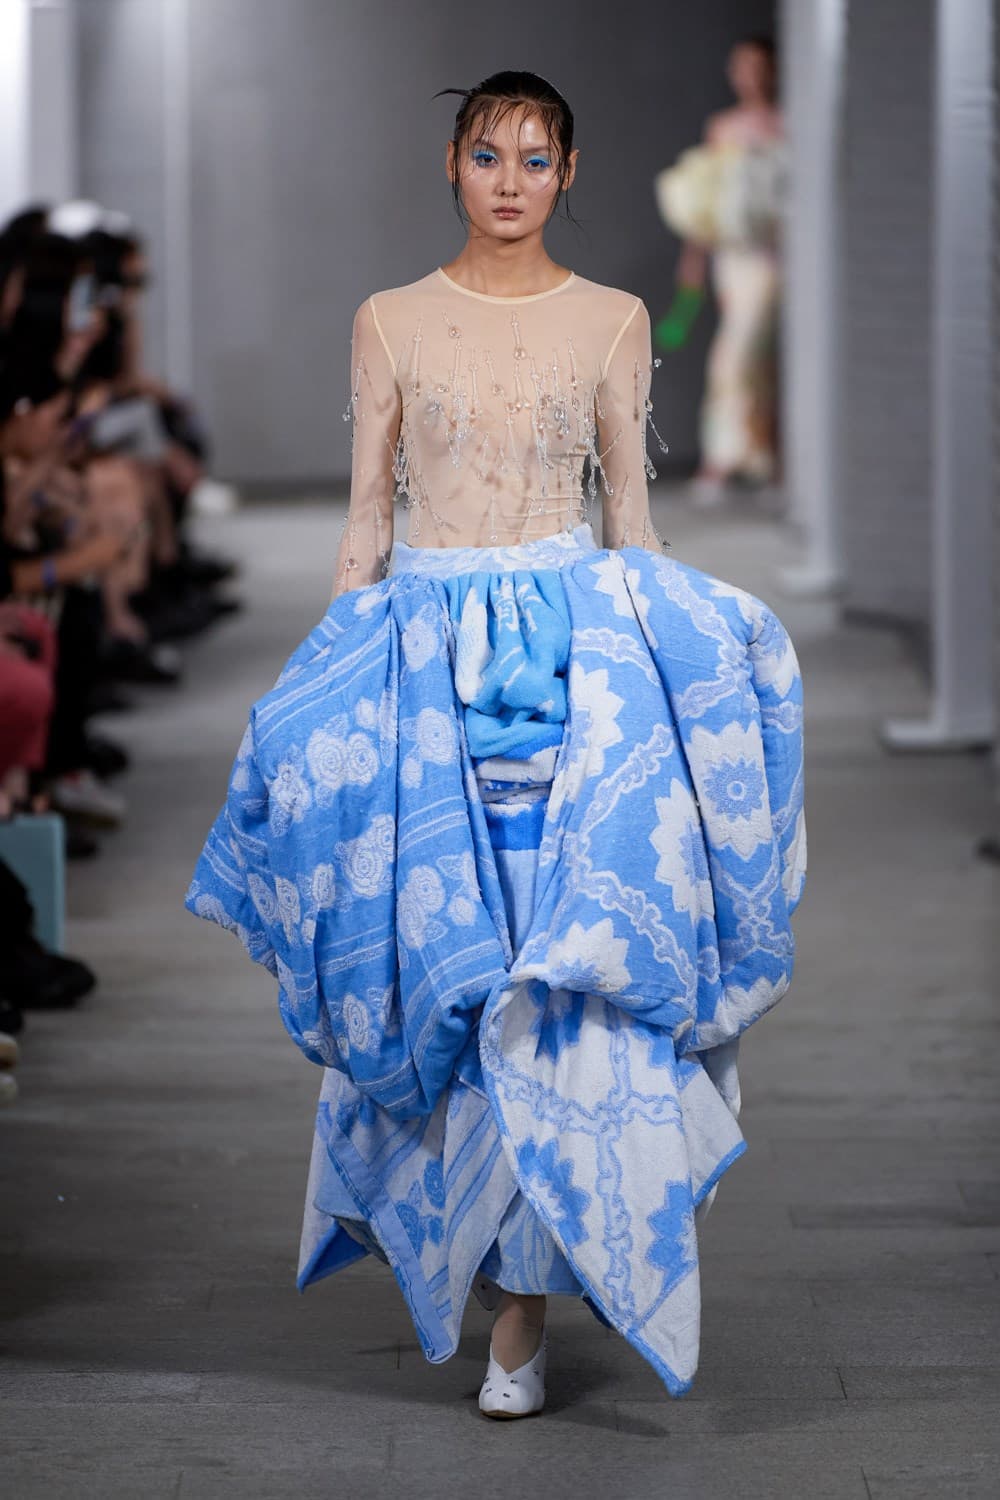 Sheer Spring 2022 Fashion Trend | The Impression